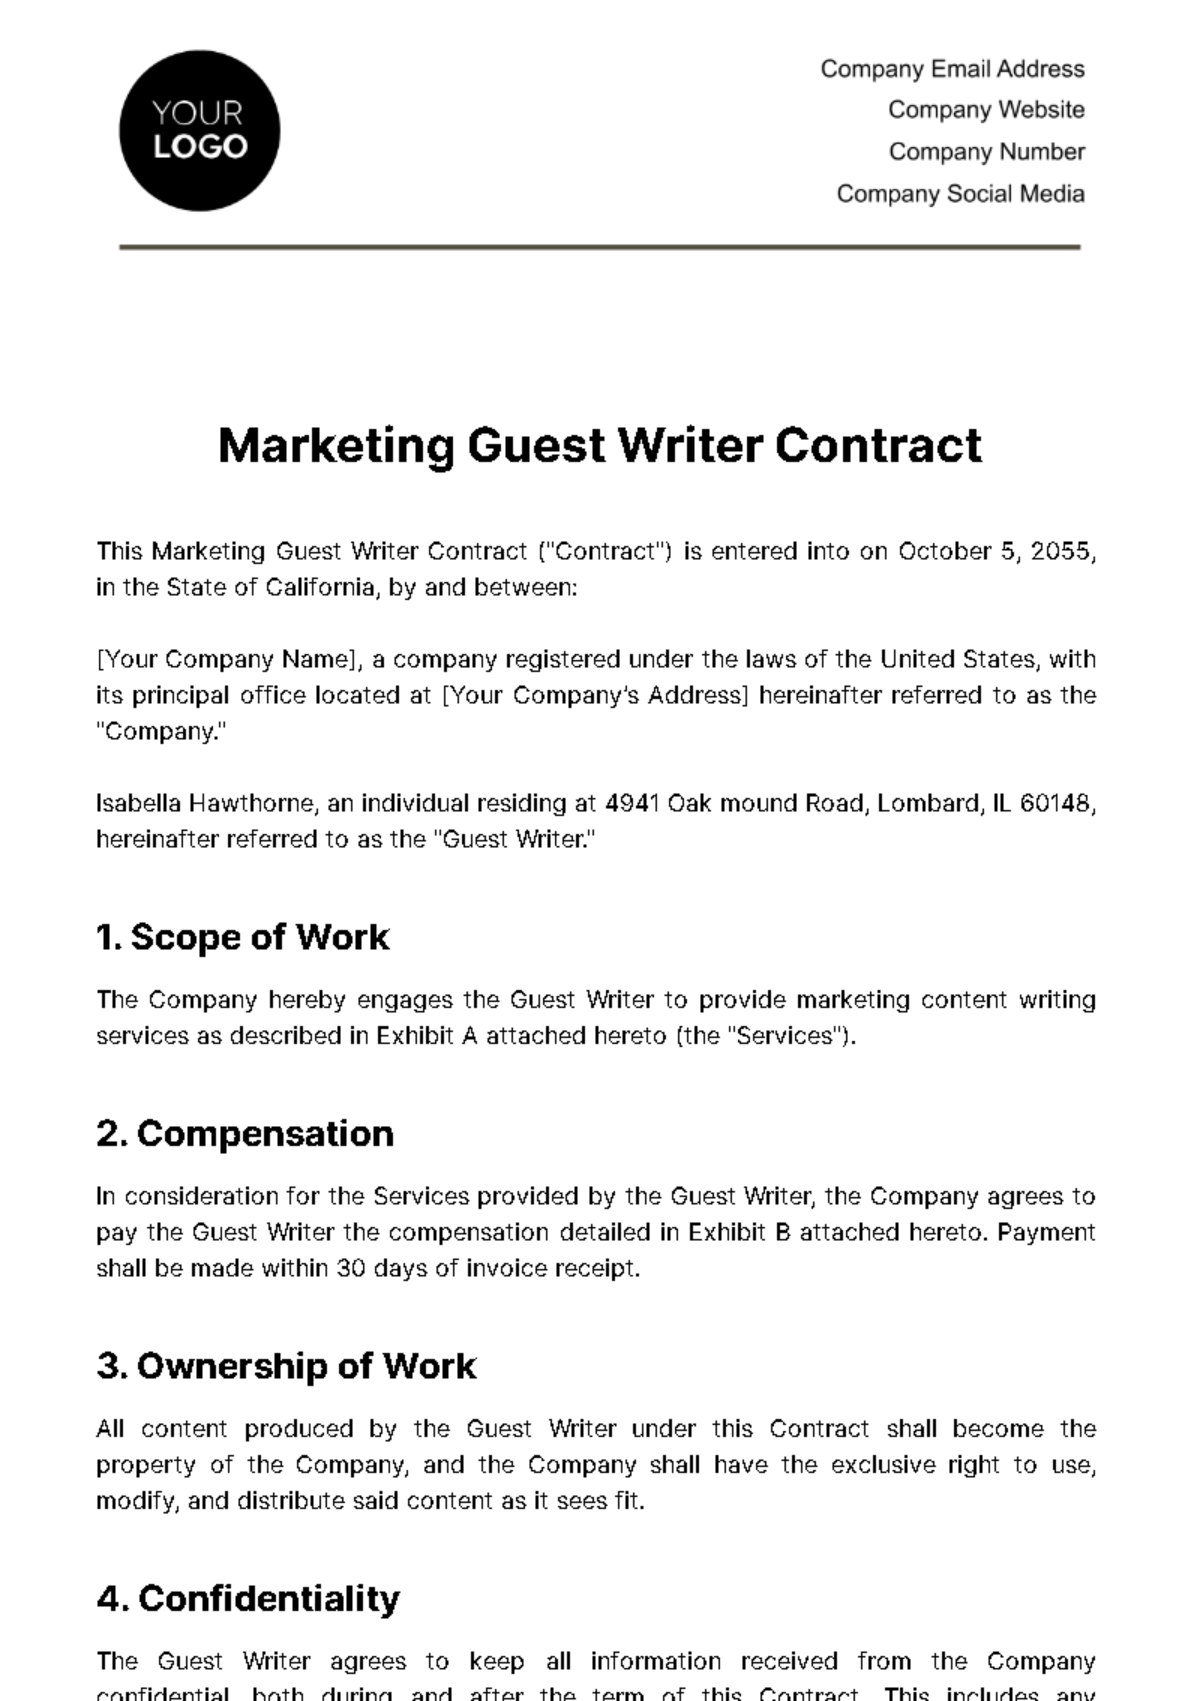 Marketing Guest Writer Contract Template